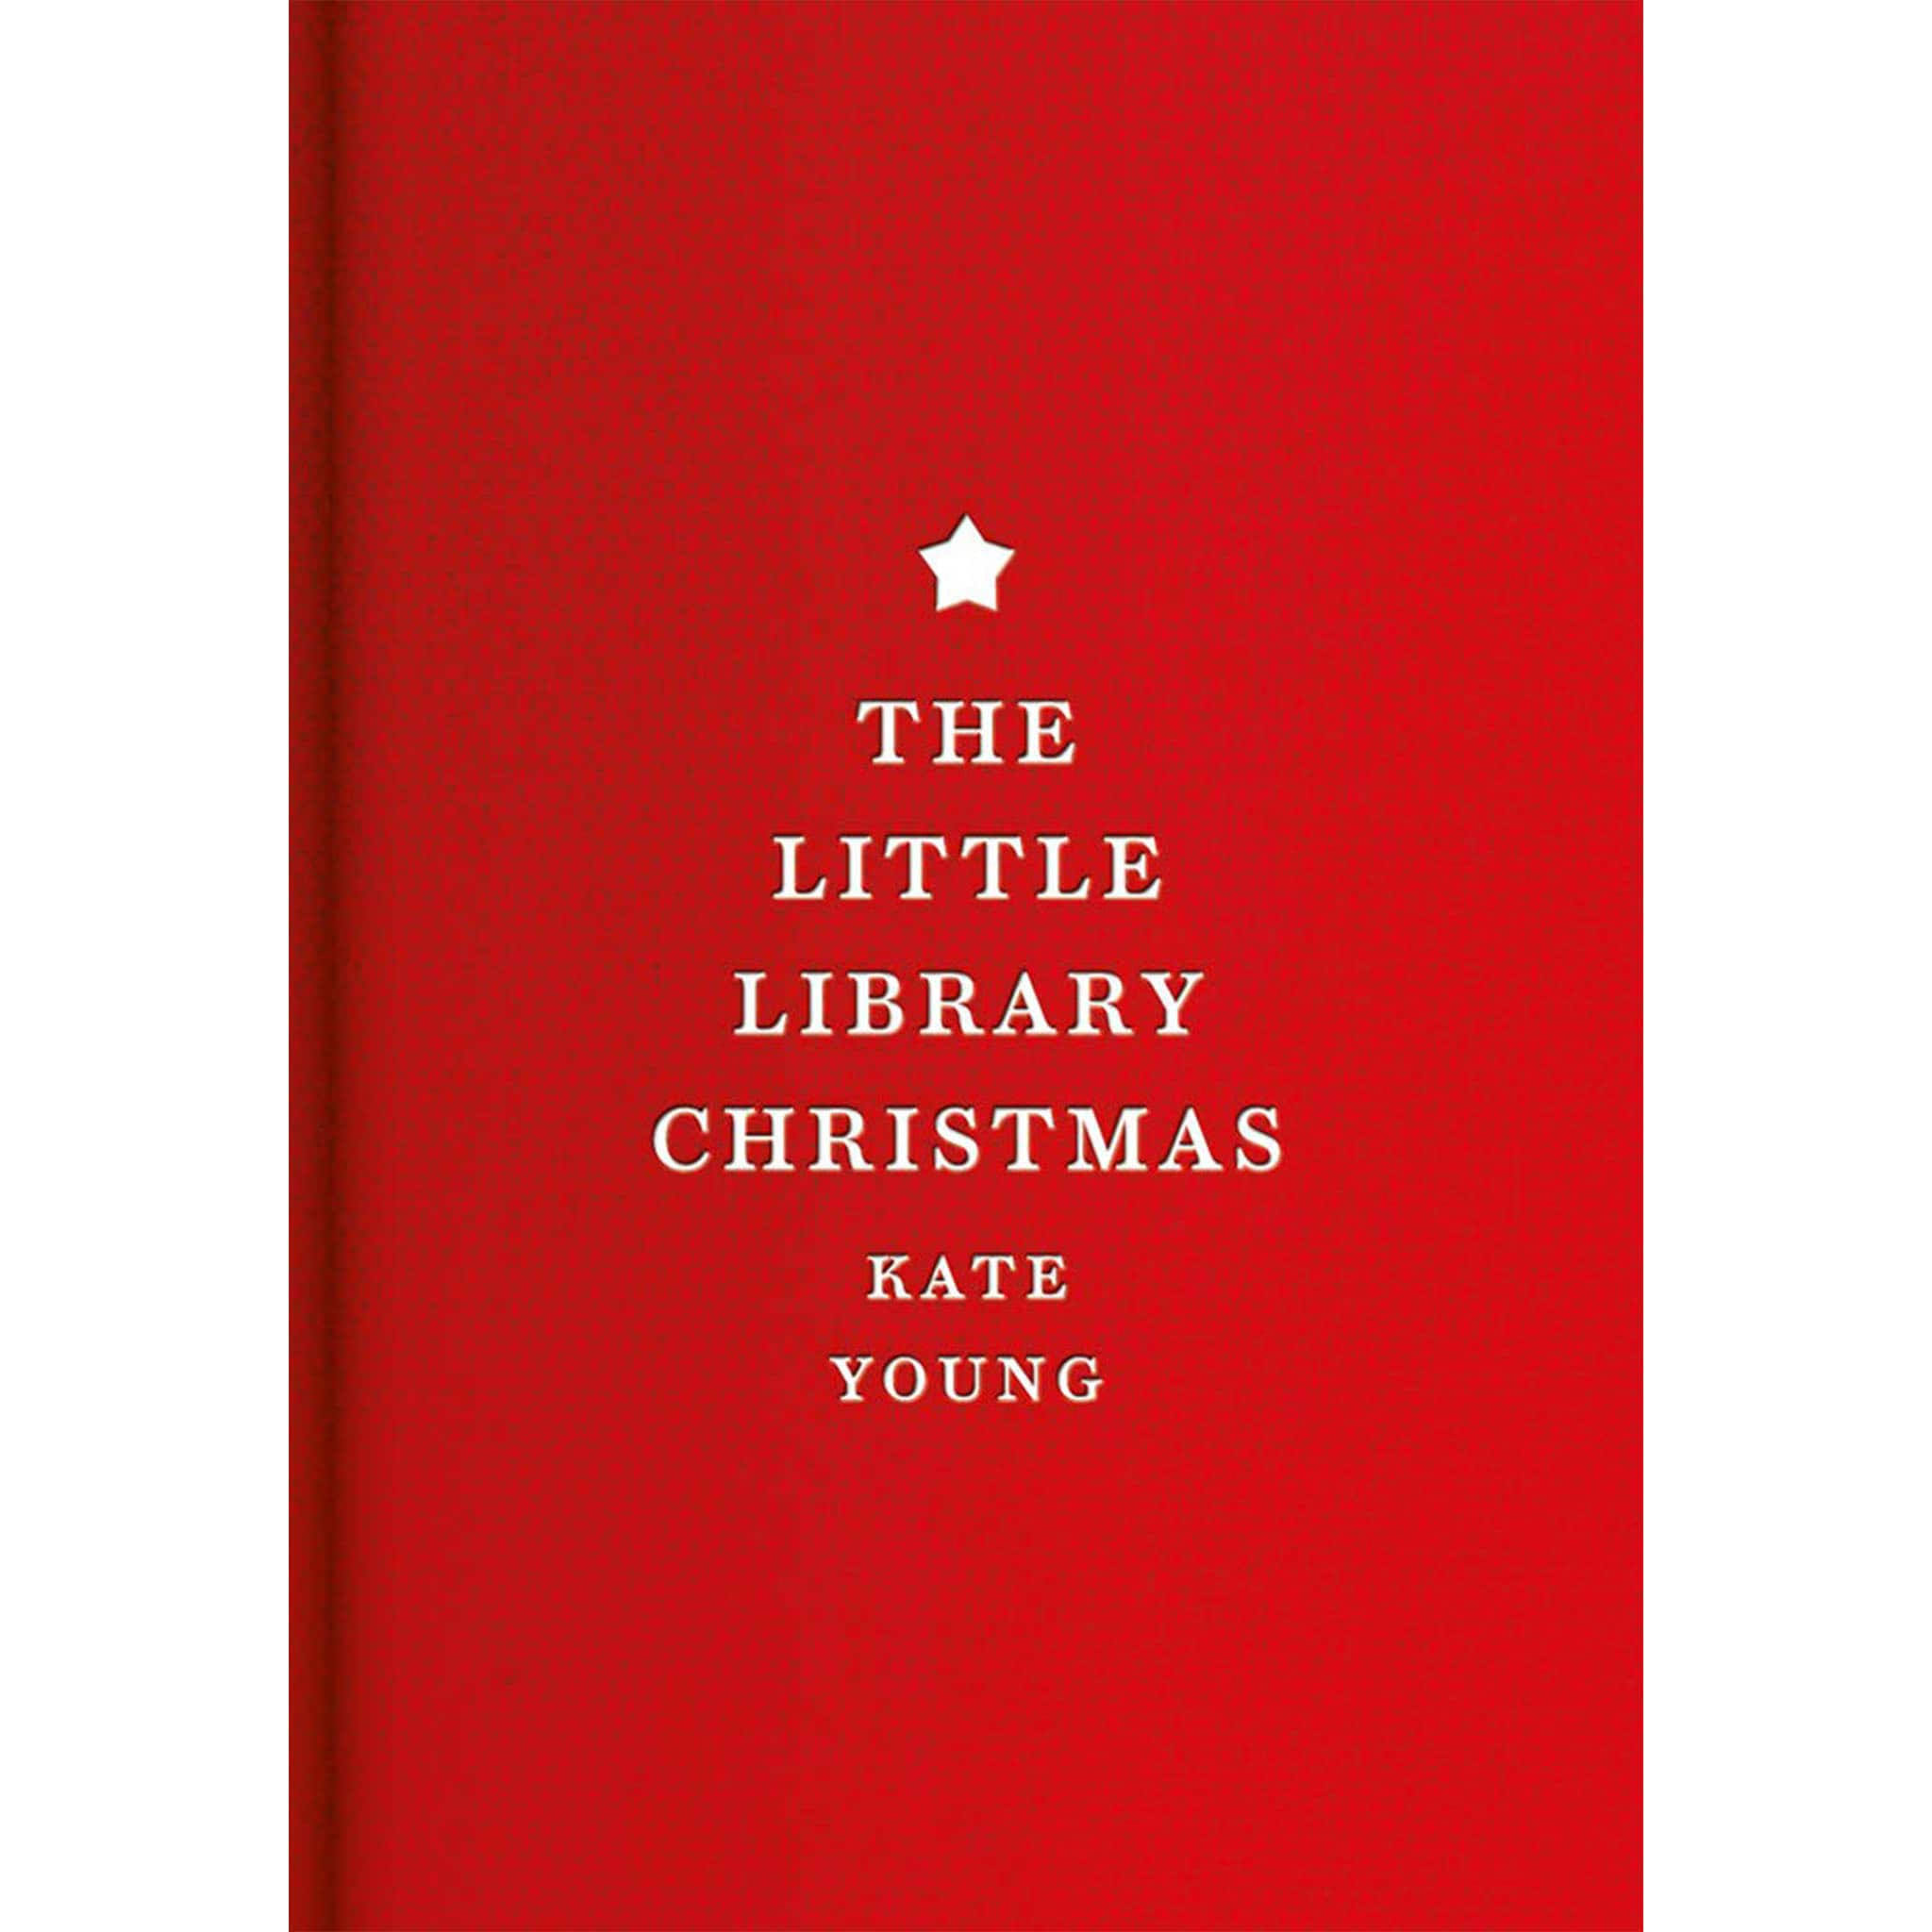 The Little Library Christmas [Book]